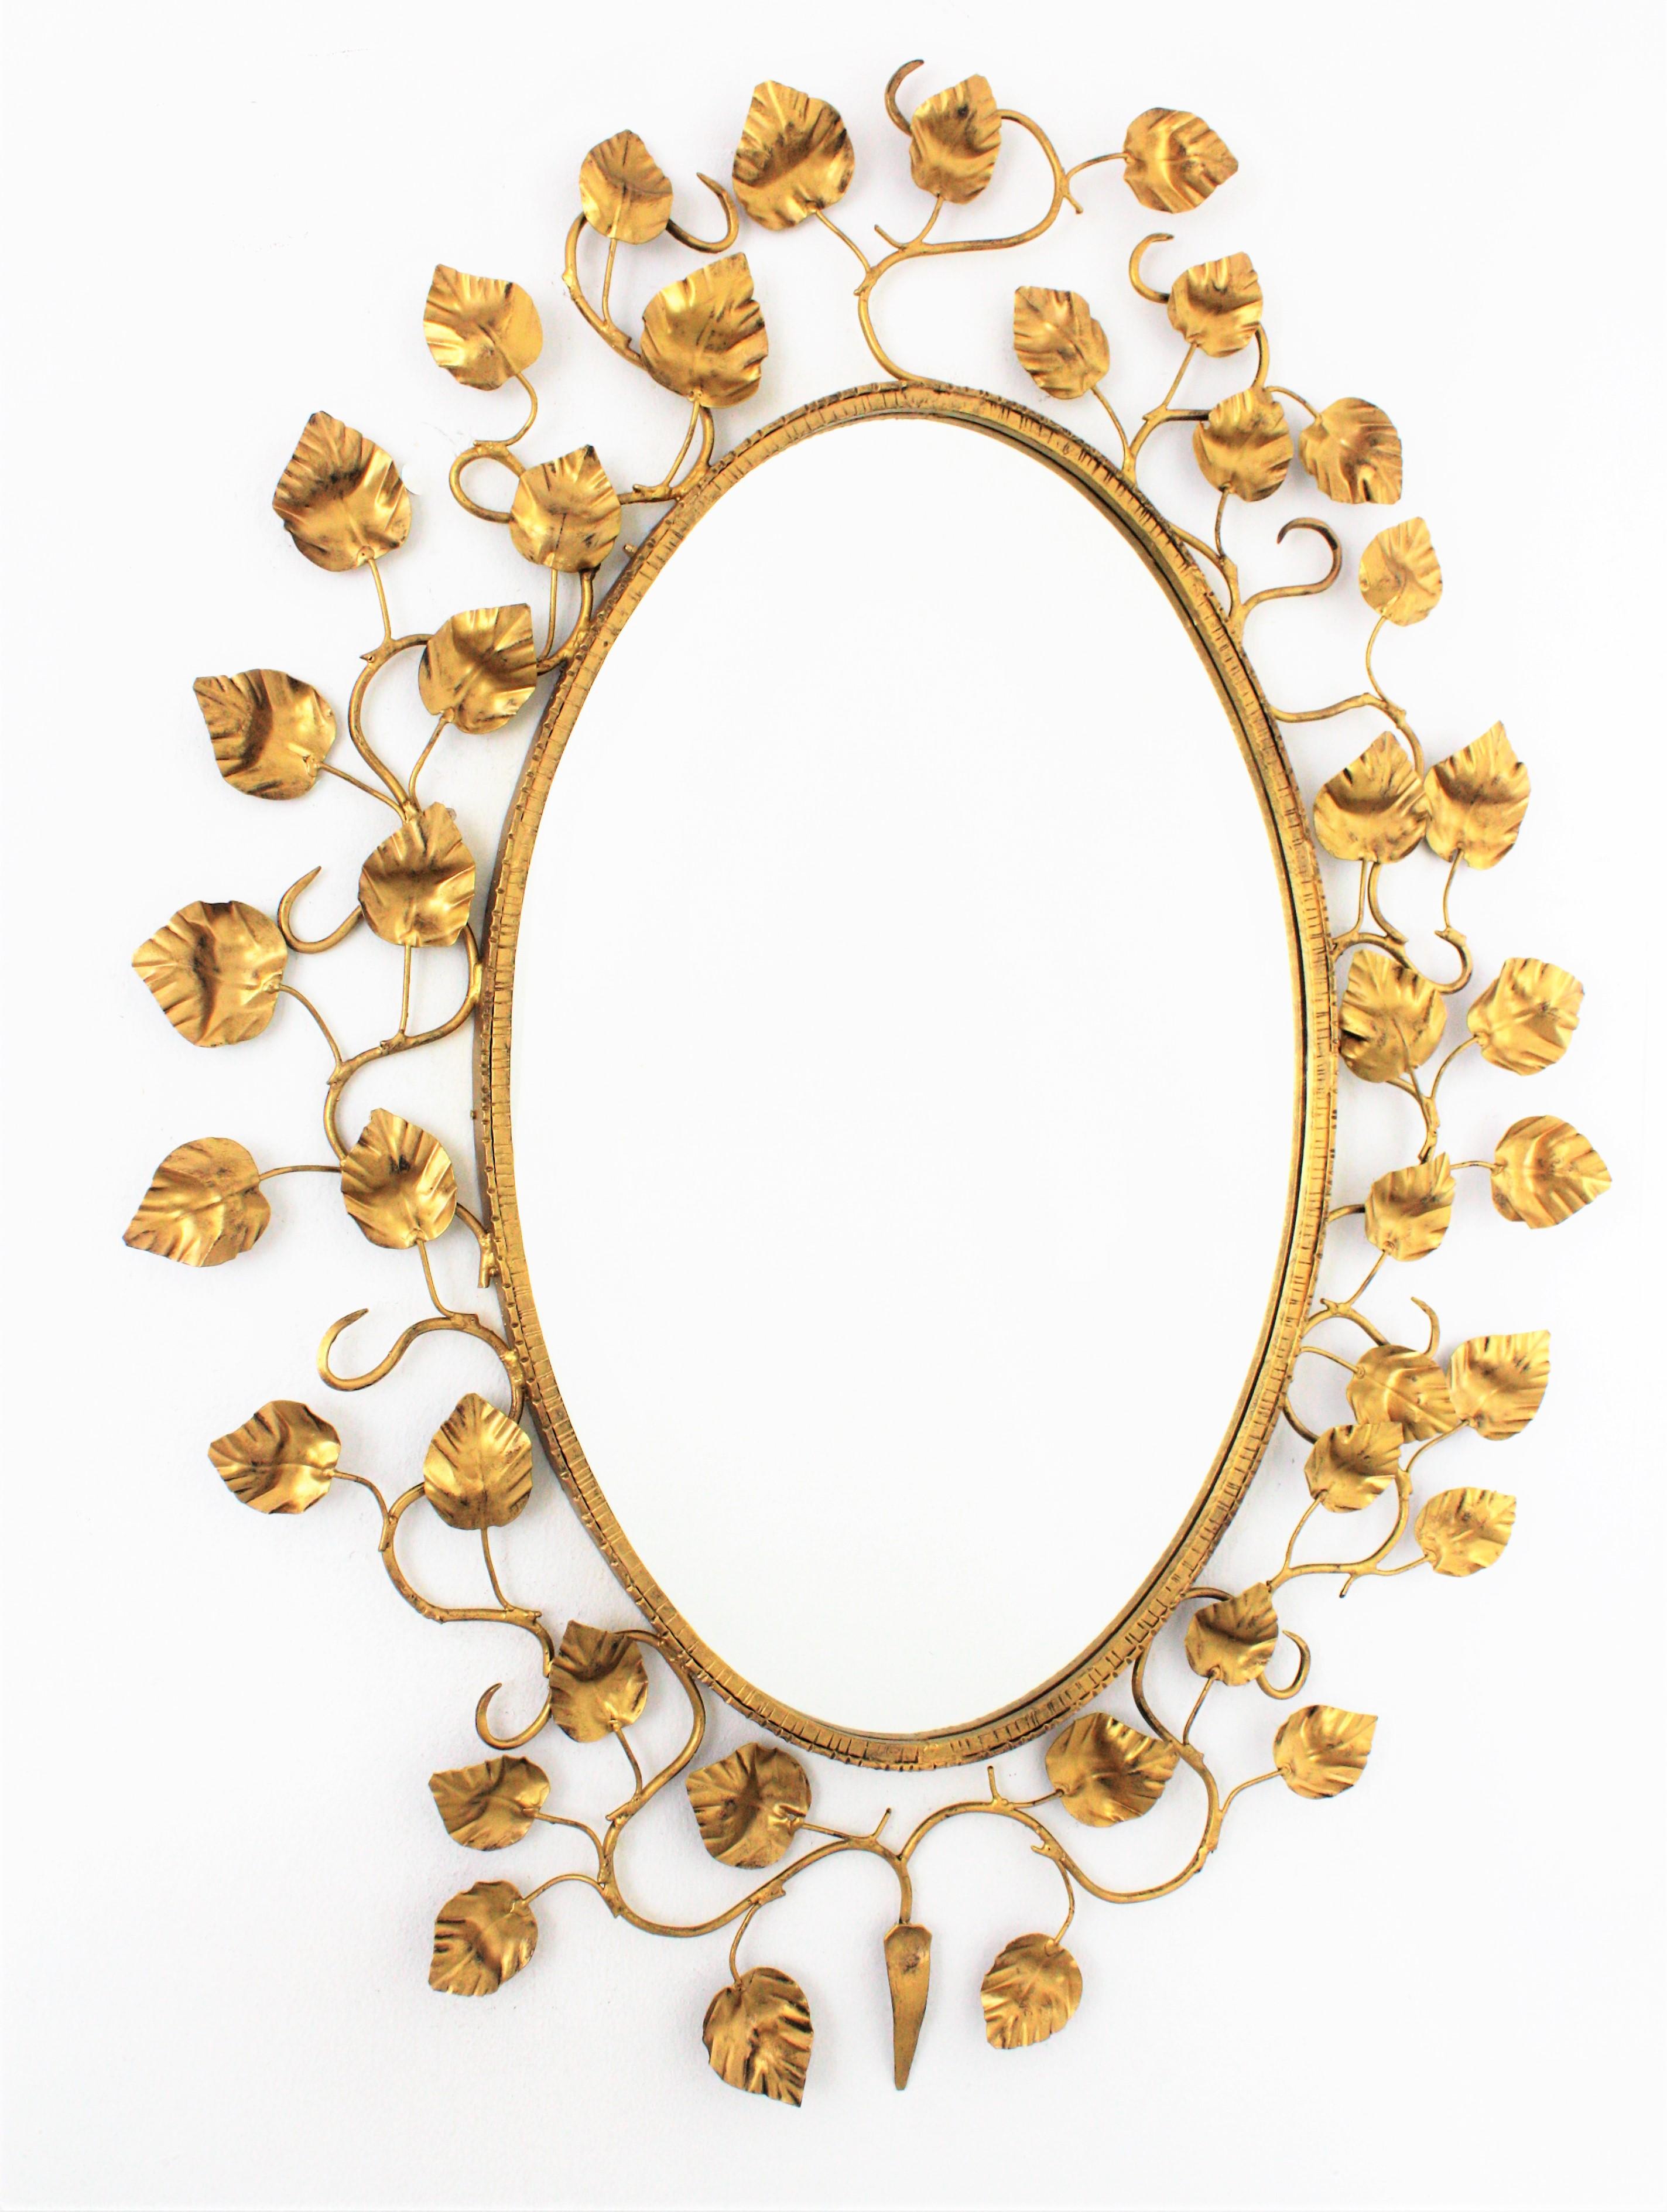 Spanish Large Oval Mirror in Gilt Iron Foliage Frame, 1950s For Sale 8